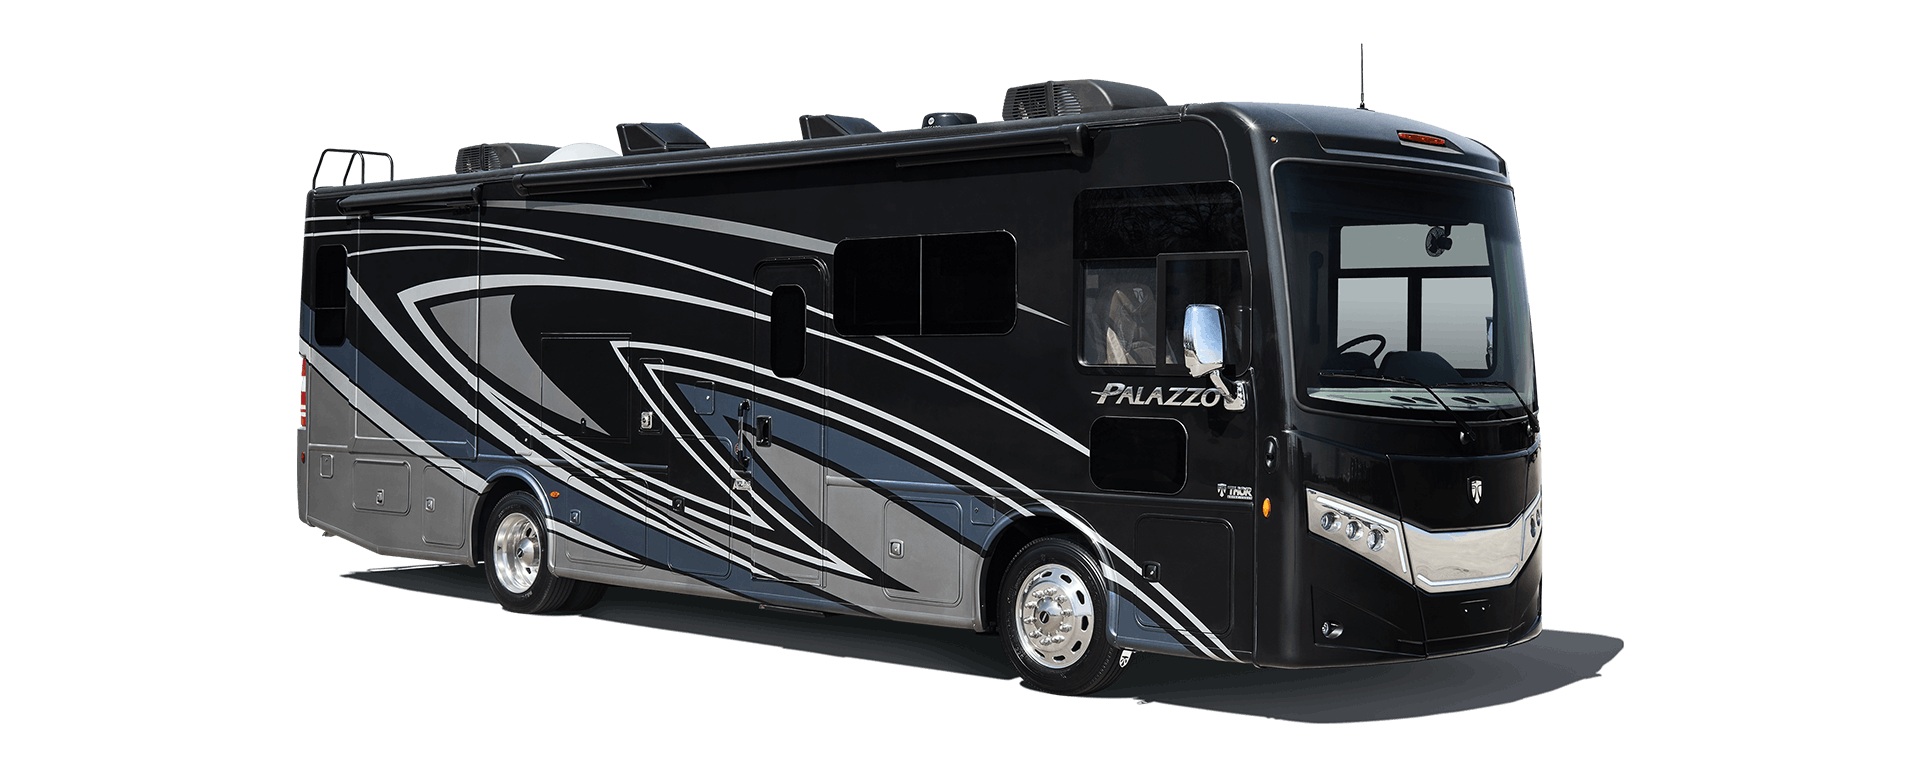 Palazzo Class A Diesel Pusher RV Pacific Dunes Exterior